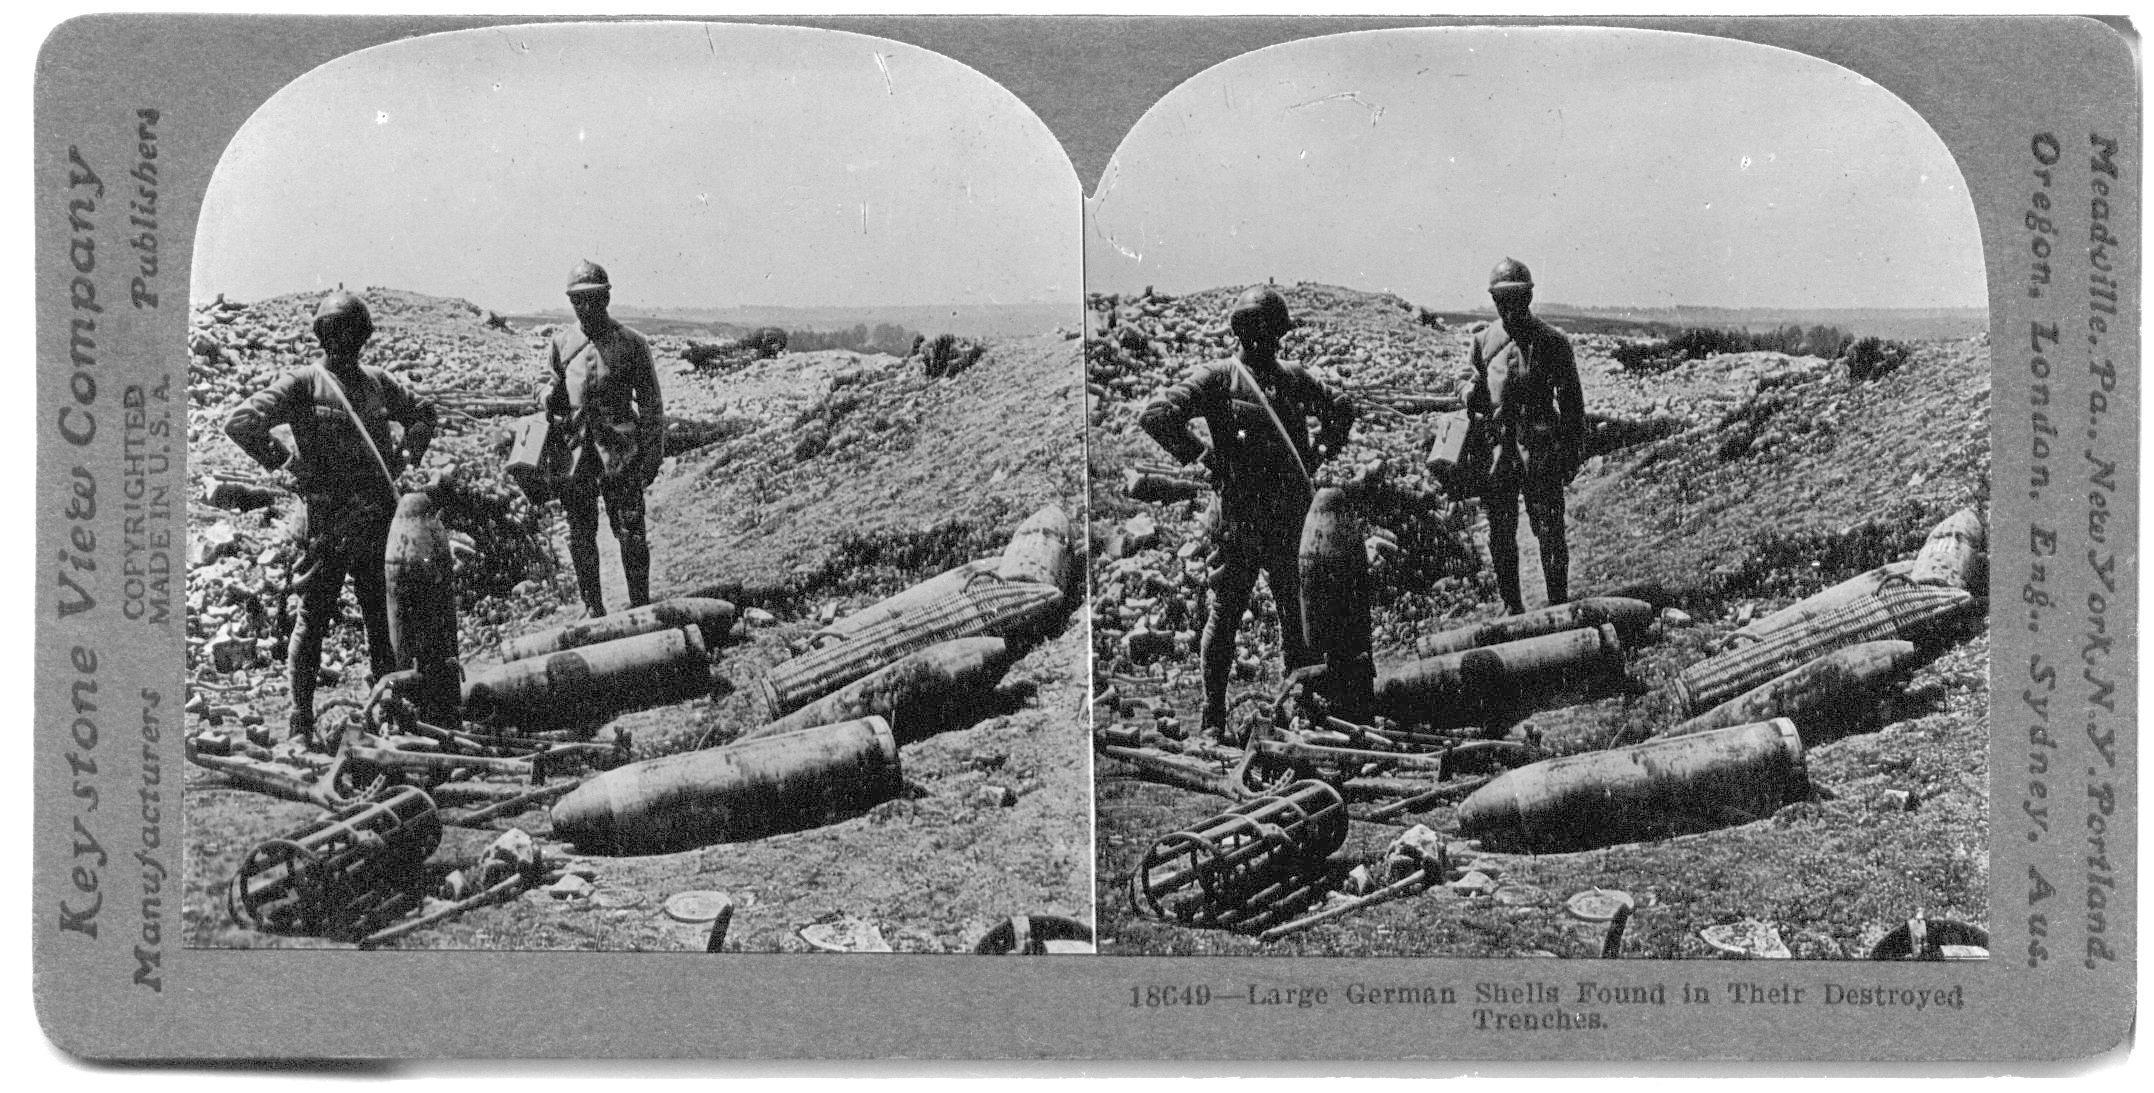 Large German Shells Found in Their Destroyed Trenches